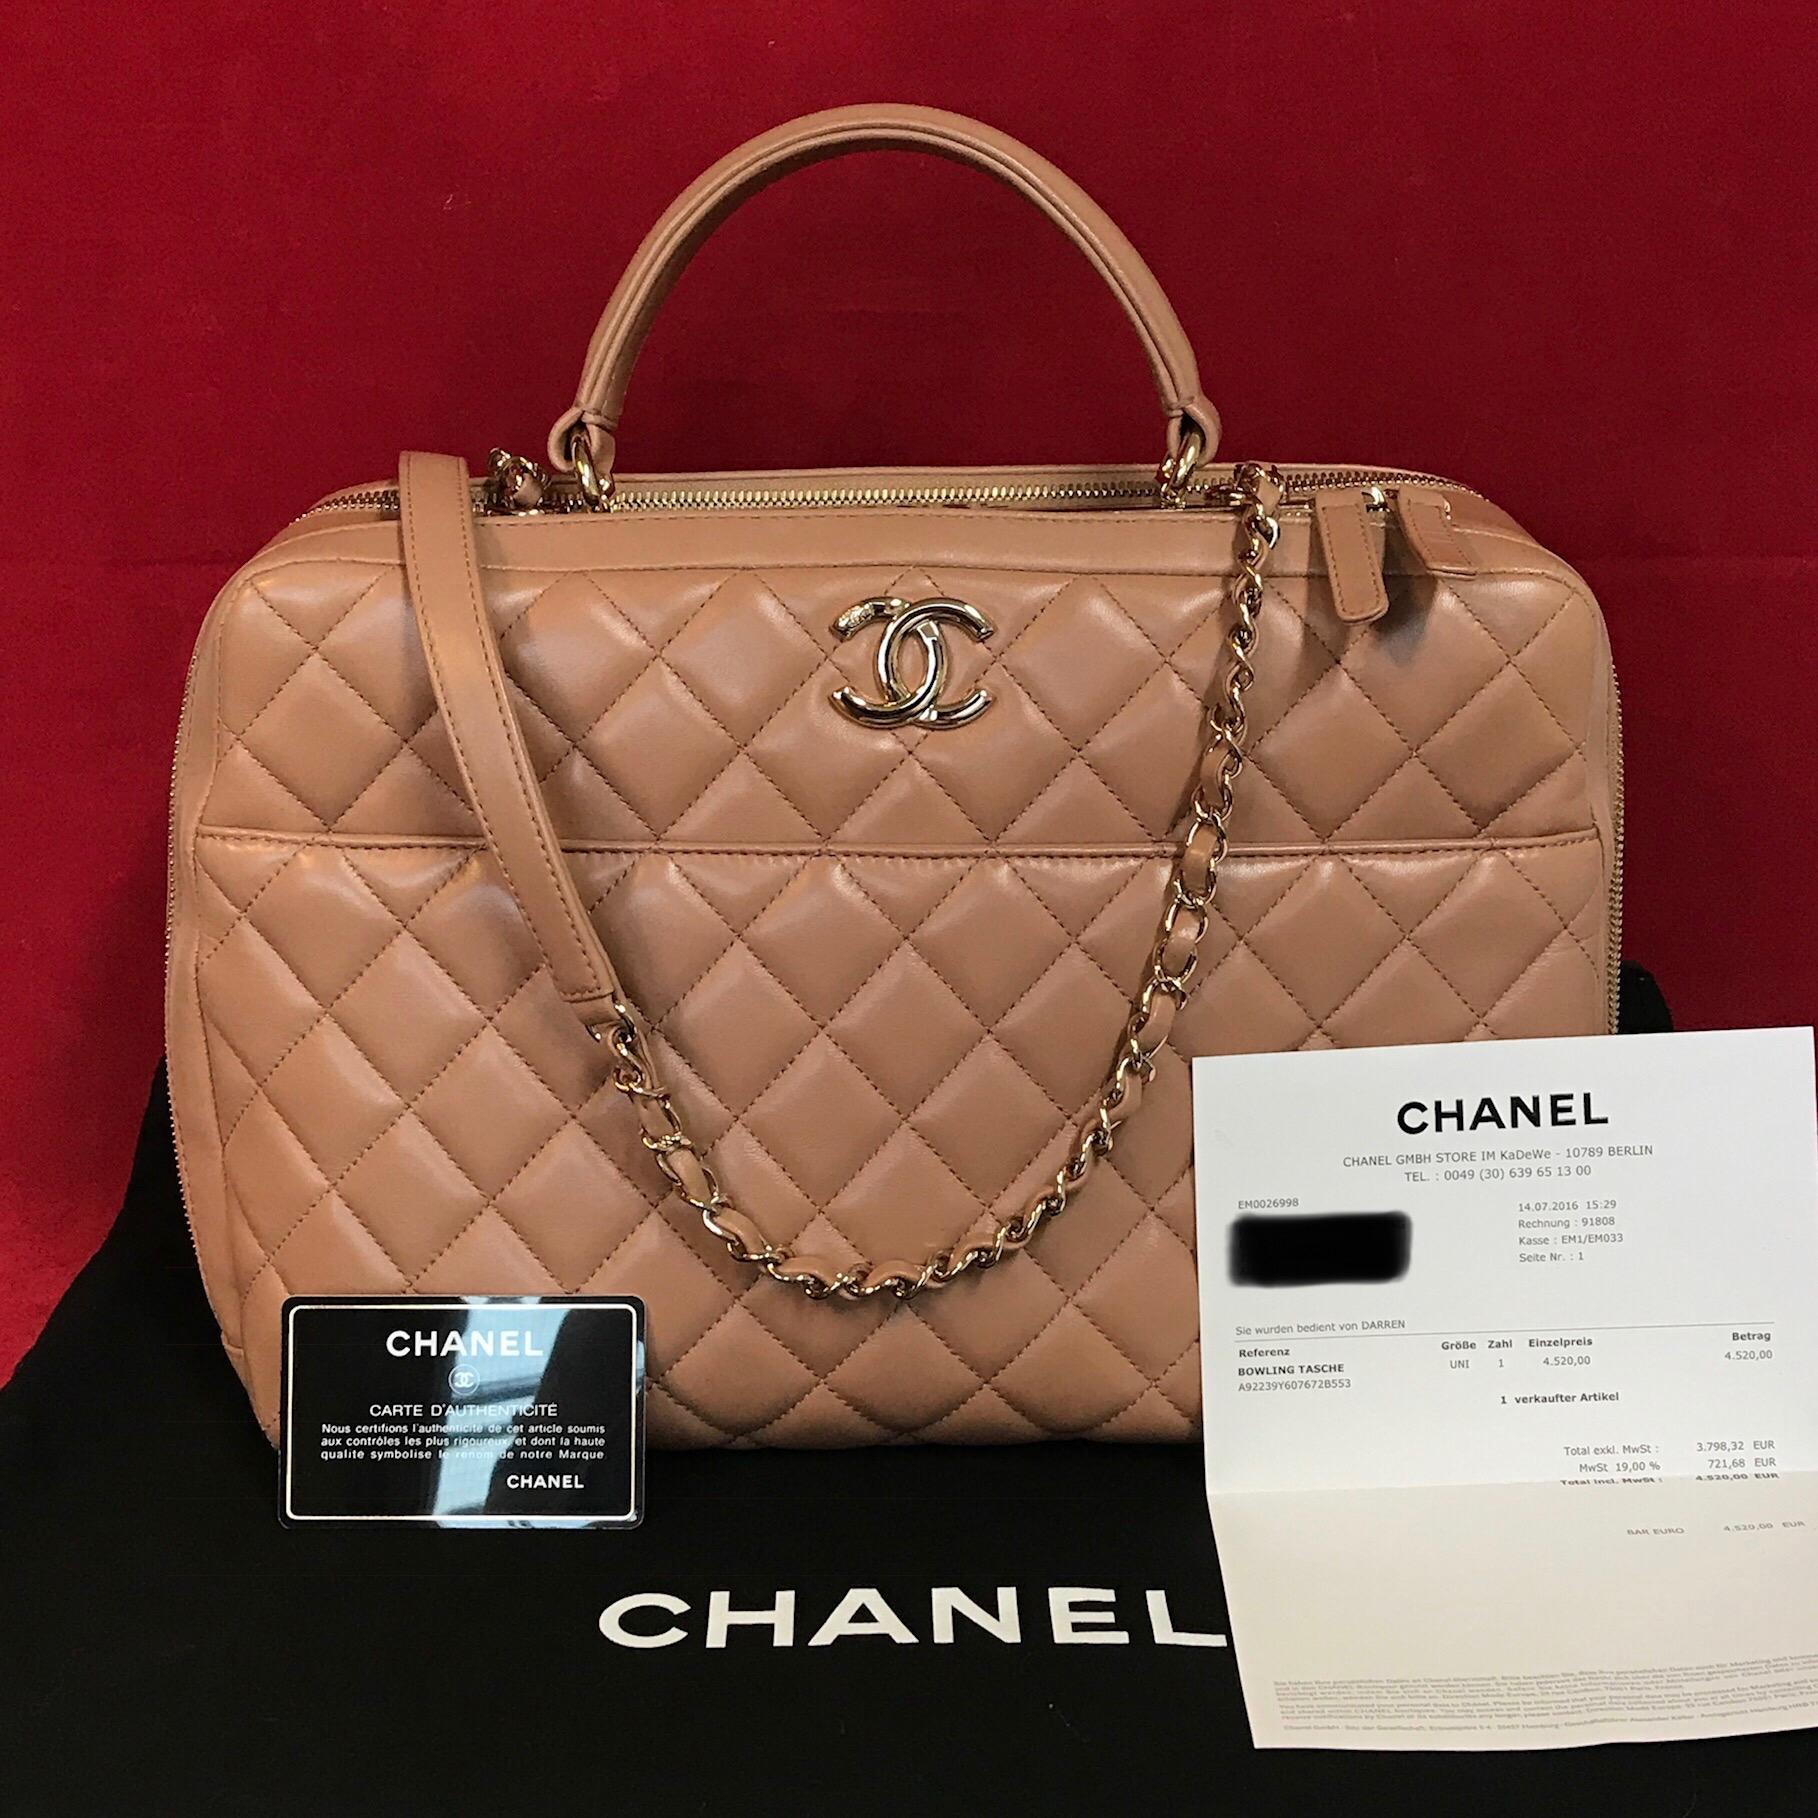 CHANEL CC bowling bag made of beige quilted lambskin & gold hardware.

The bag is in a very good condition and has minimal signs of use.

The delivery includes:
- Chanel bowling bag
- Dustbag
- warranty card
- Original CHANEL bill of